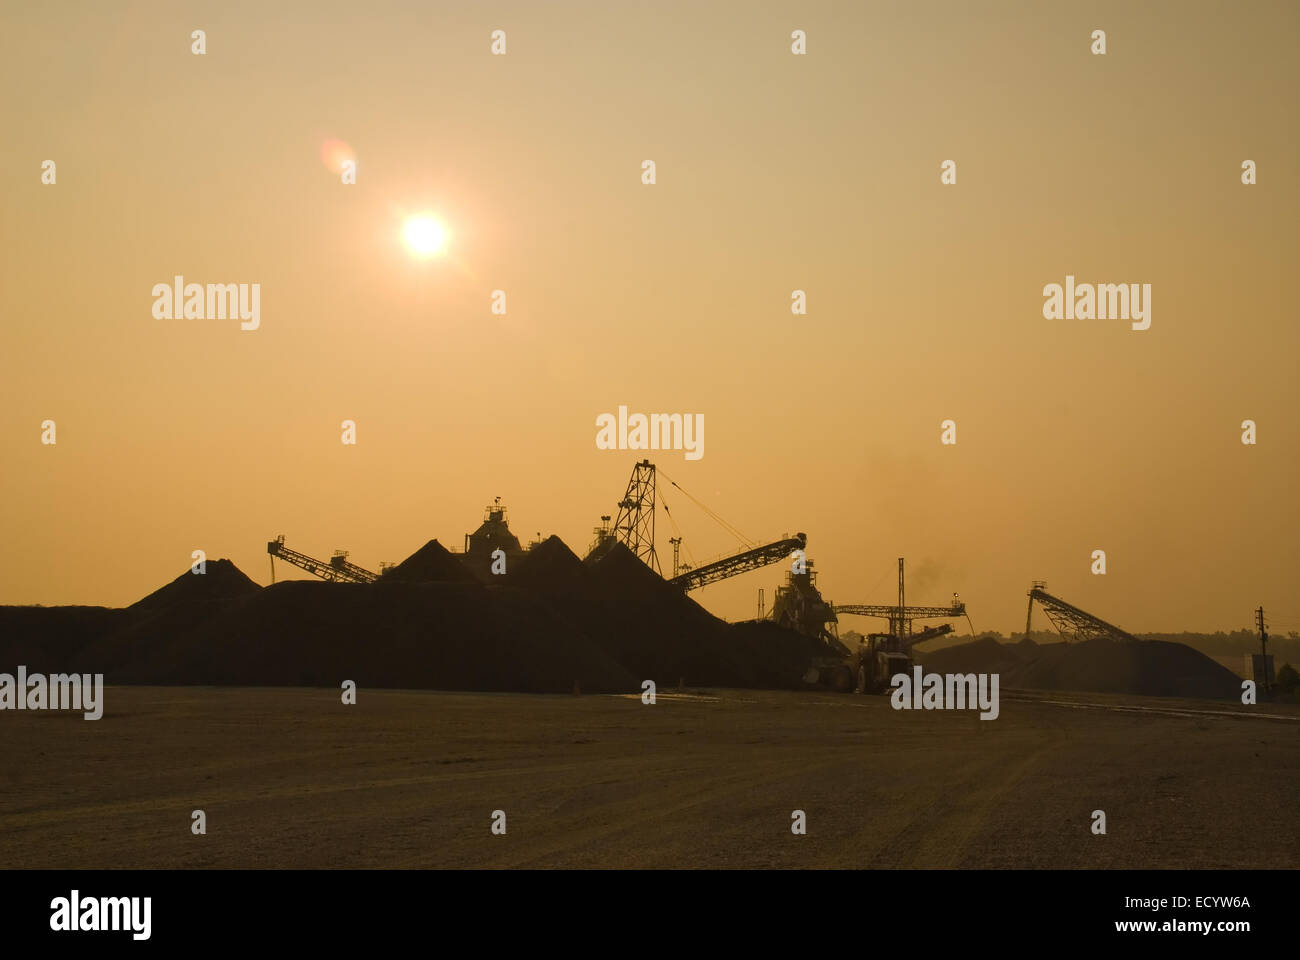 A silhouette view of a mining company on a scorching summer day. Stock Photo